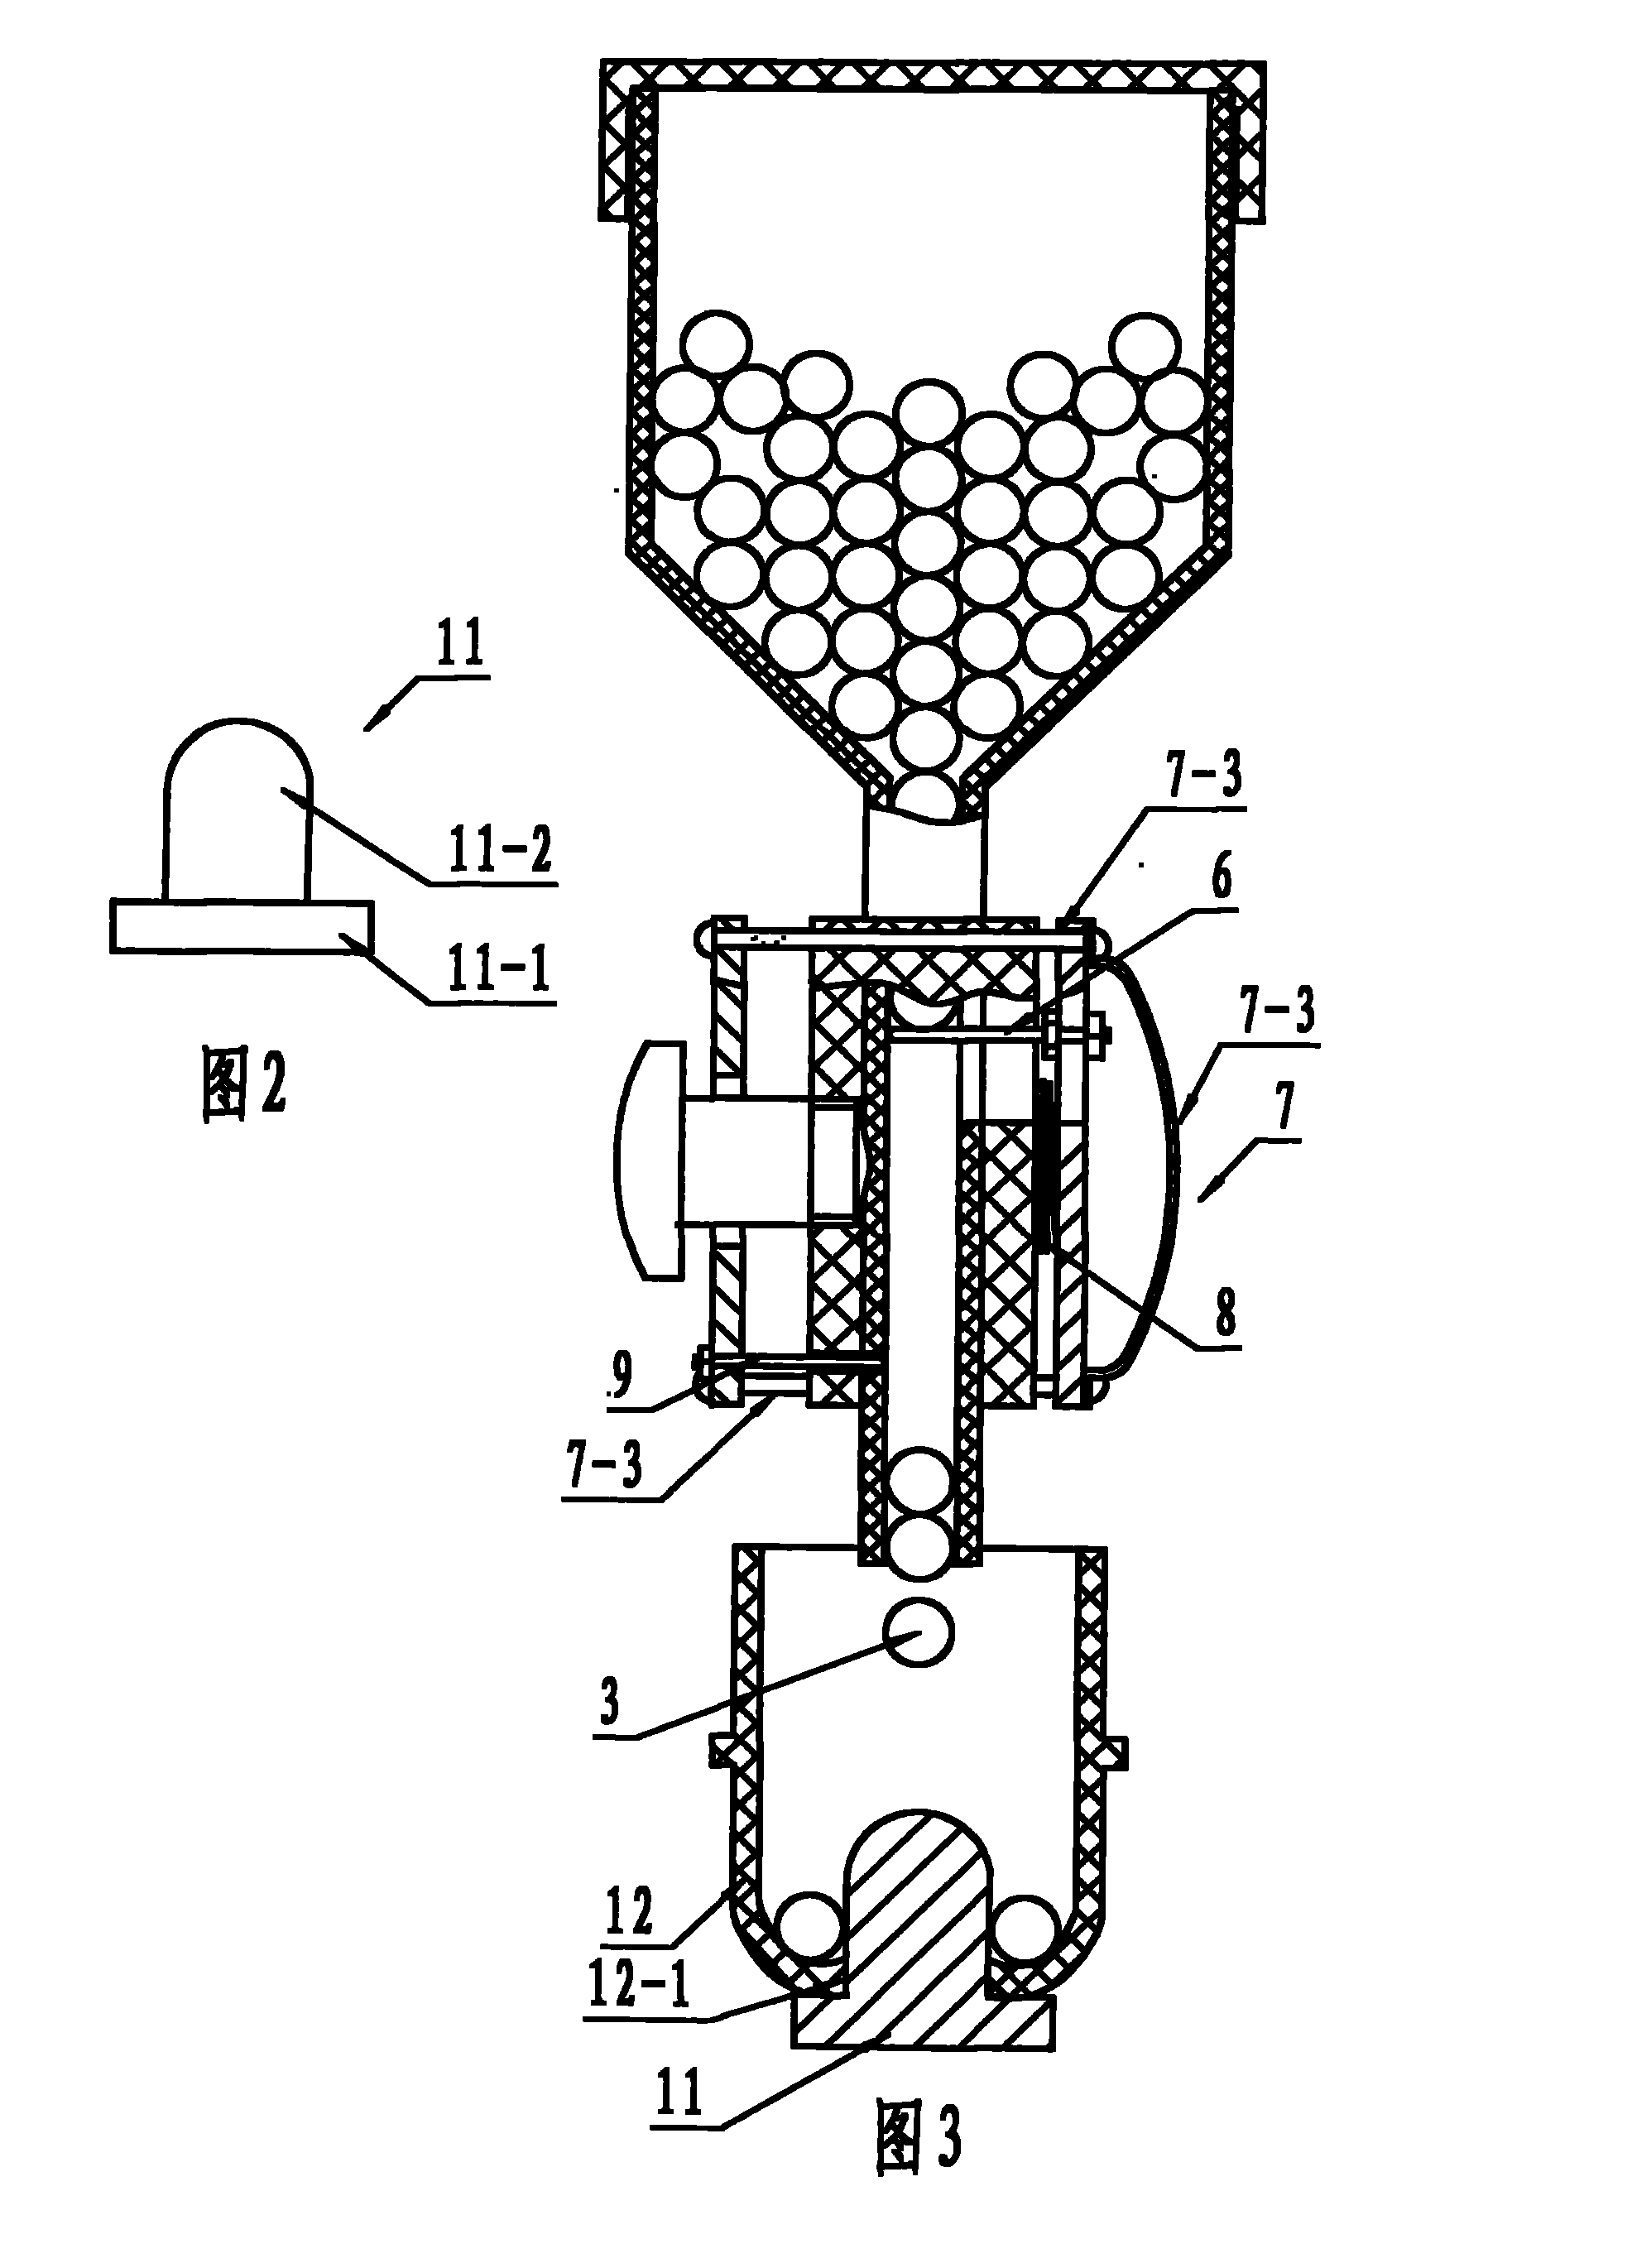 Quantification ball dripping device assembly